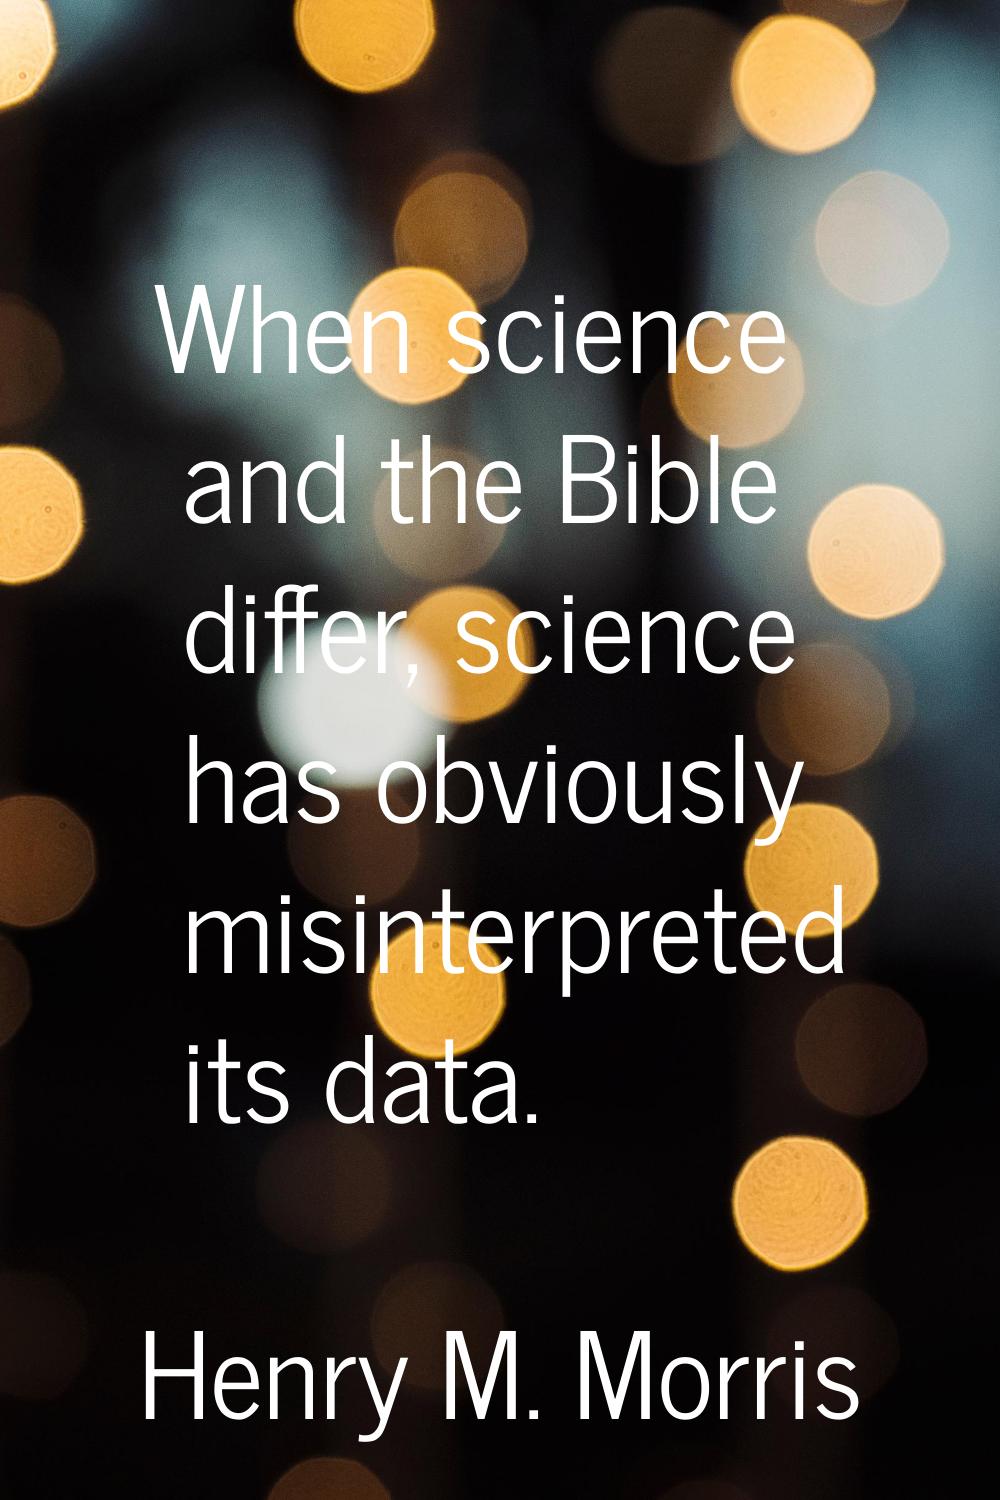 When science and the Bible differ, science has obviously misinterpreted its data.